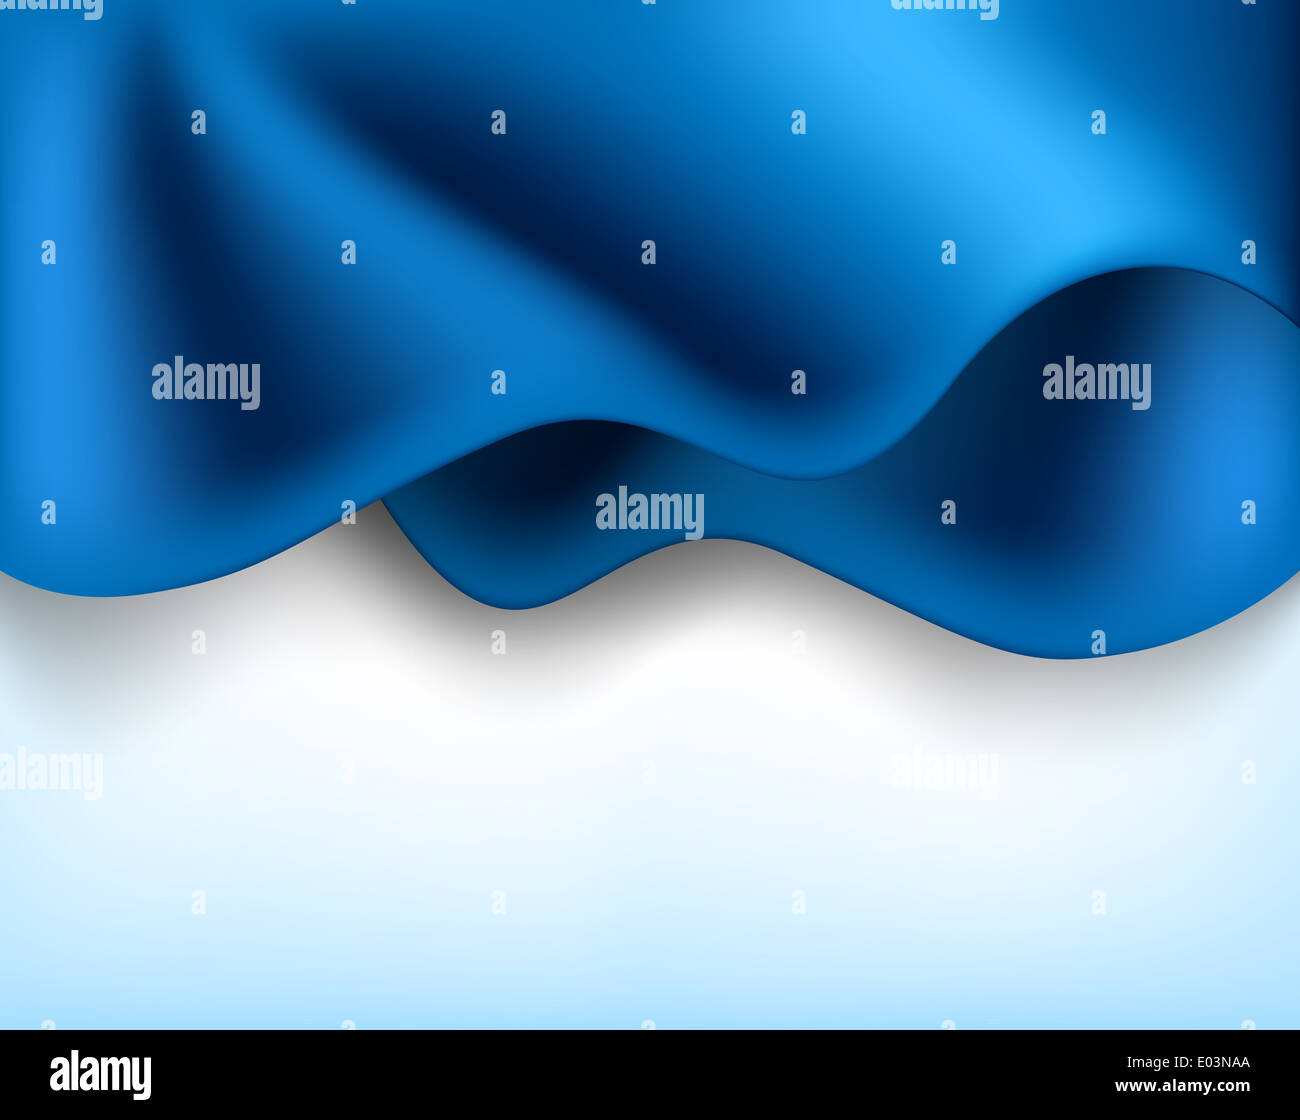 Abstract blue wavy background. Bright illustration Stock Photo